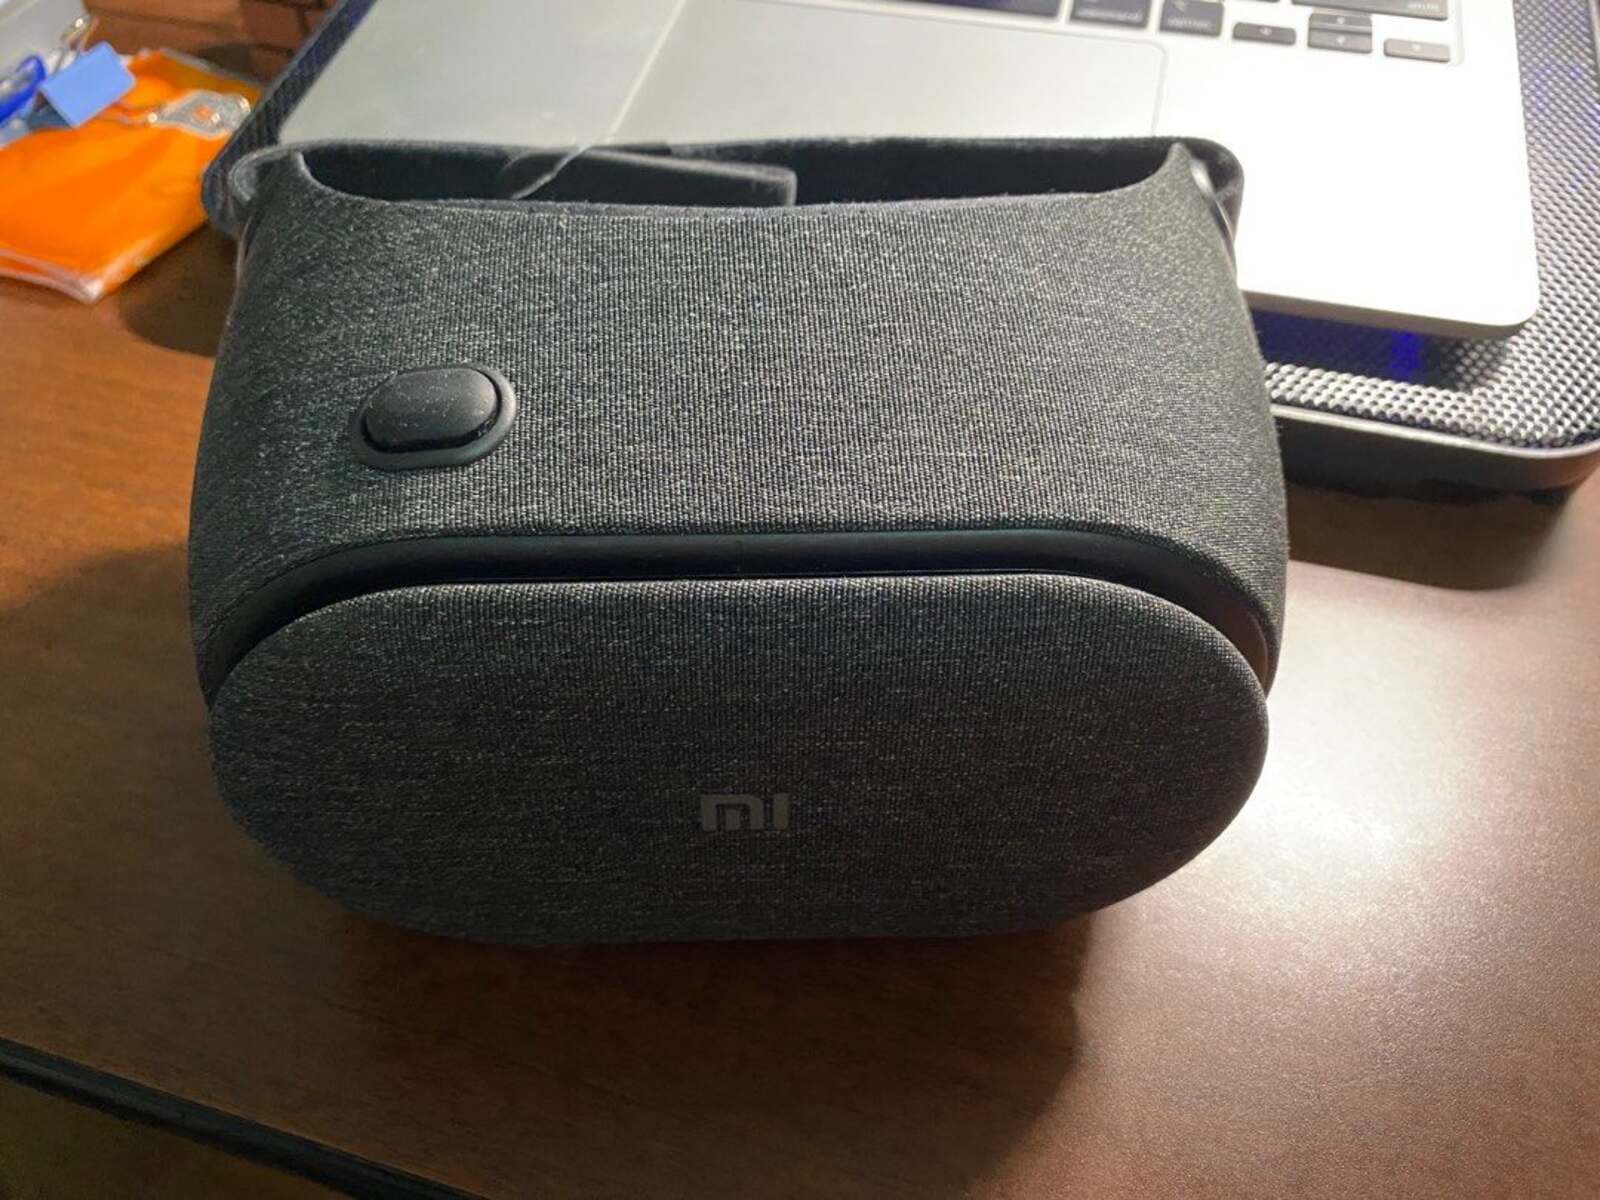 Step-by-Step Guide To Setup Xiaomi Play 2 VR On Android